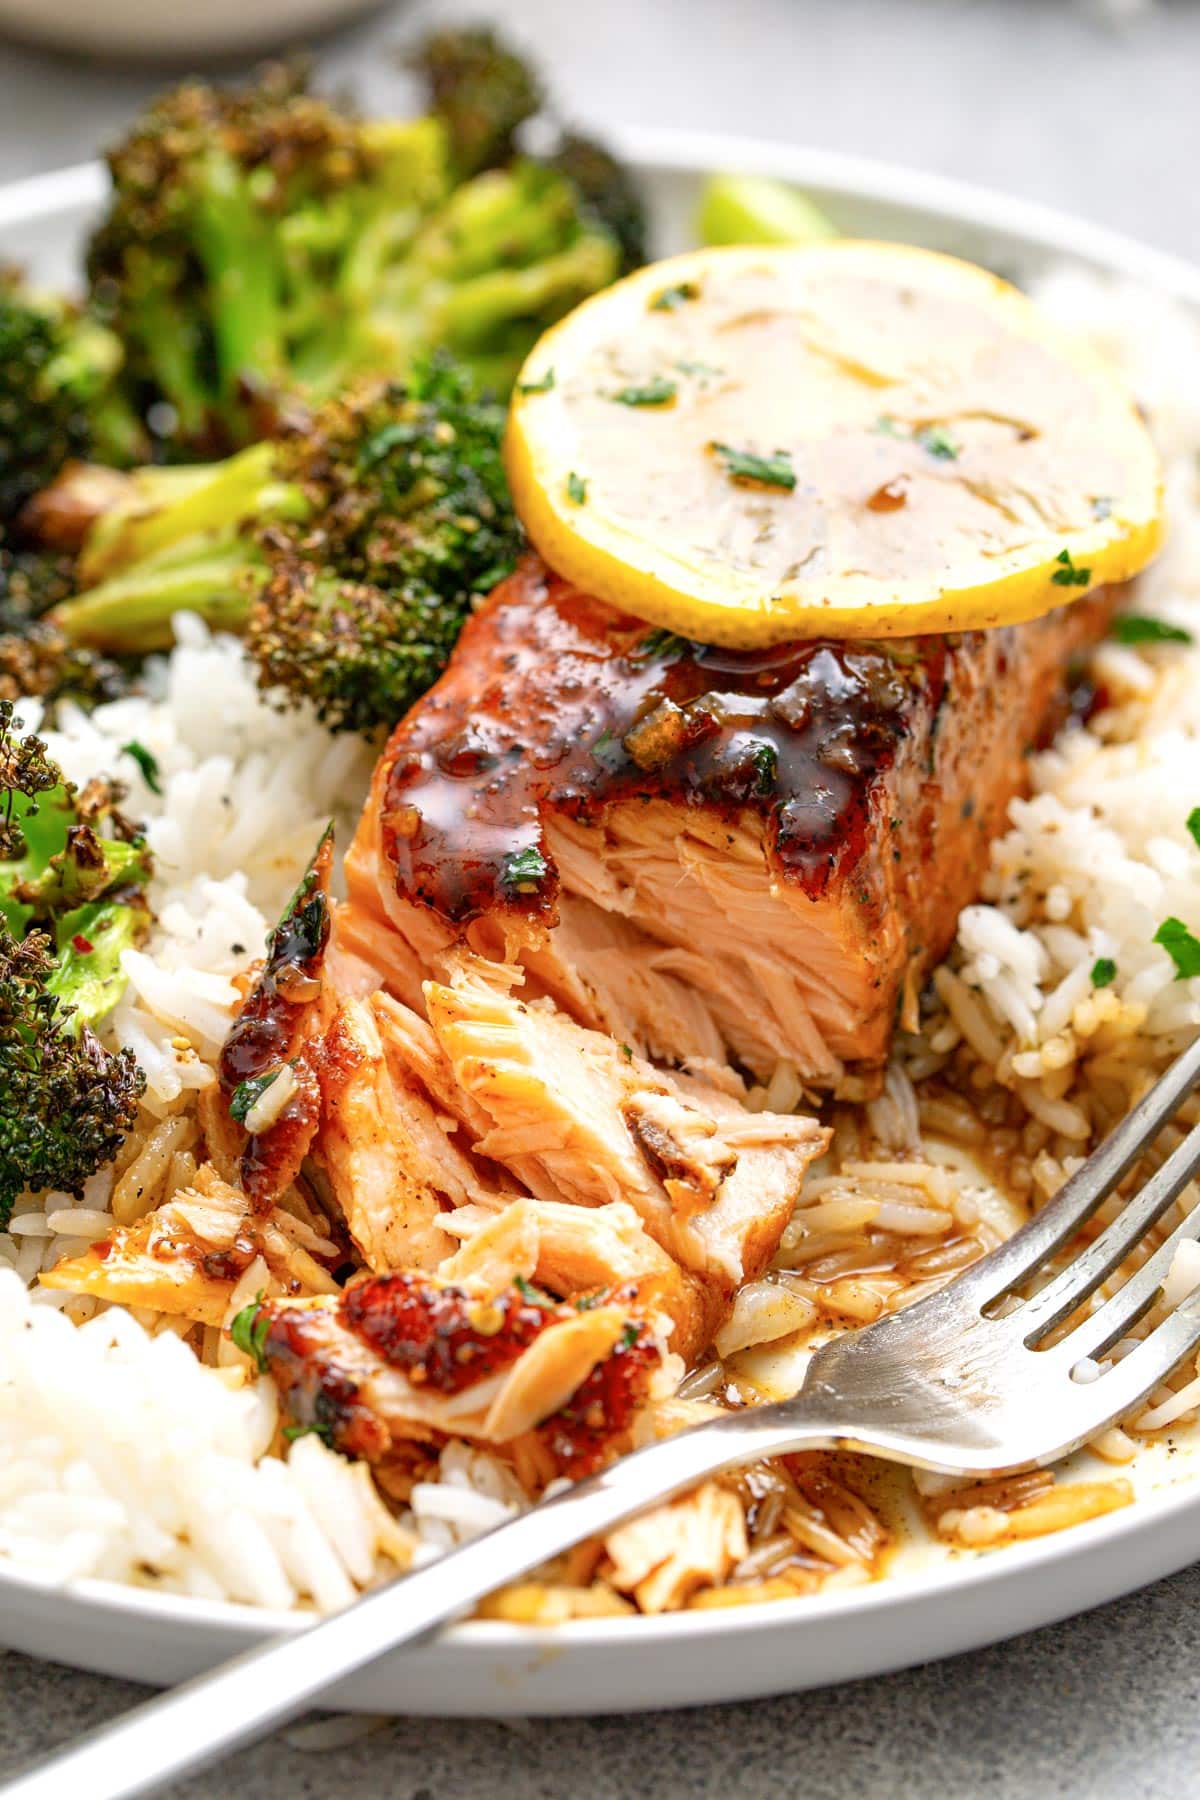 Honey glazed salmon over a bed of white rice and a side of roasted broccoli.